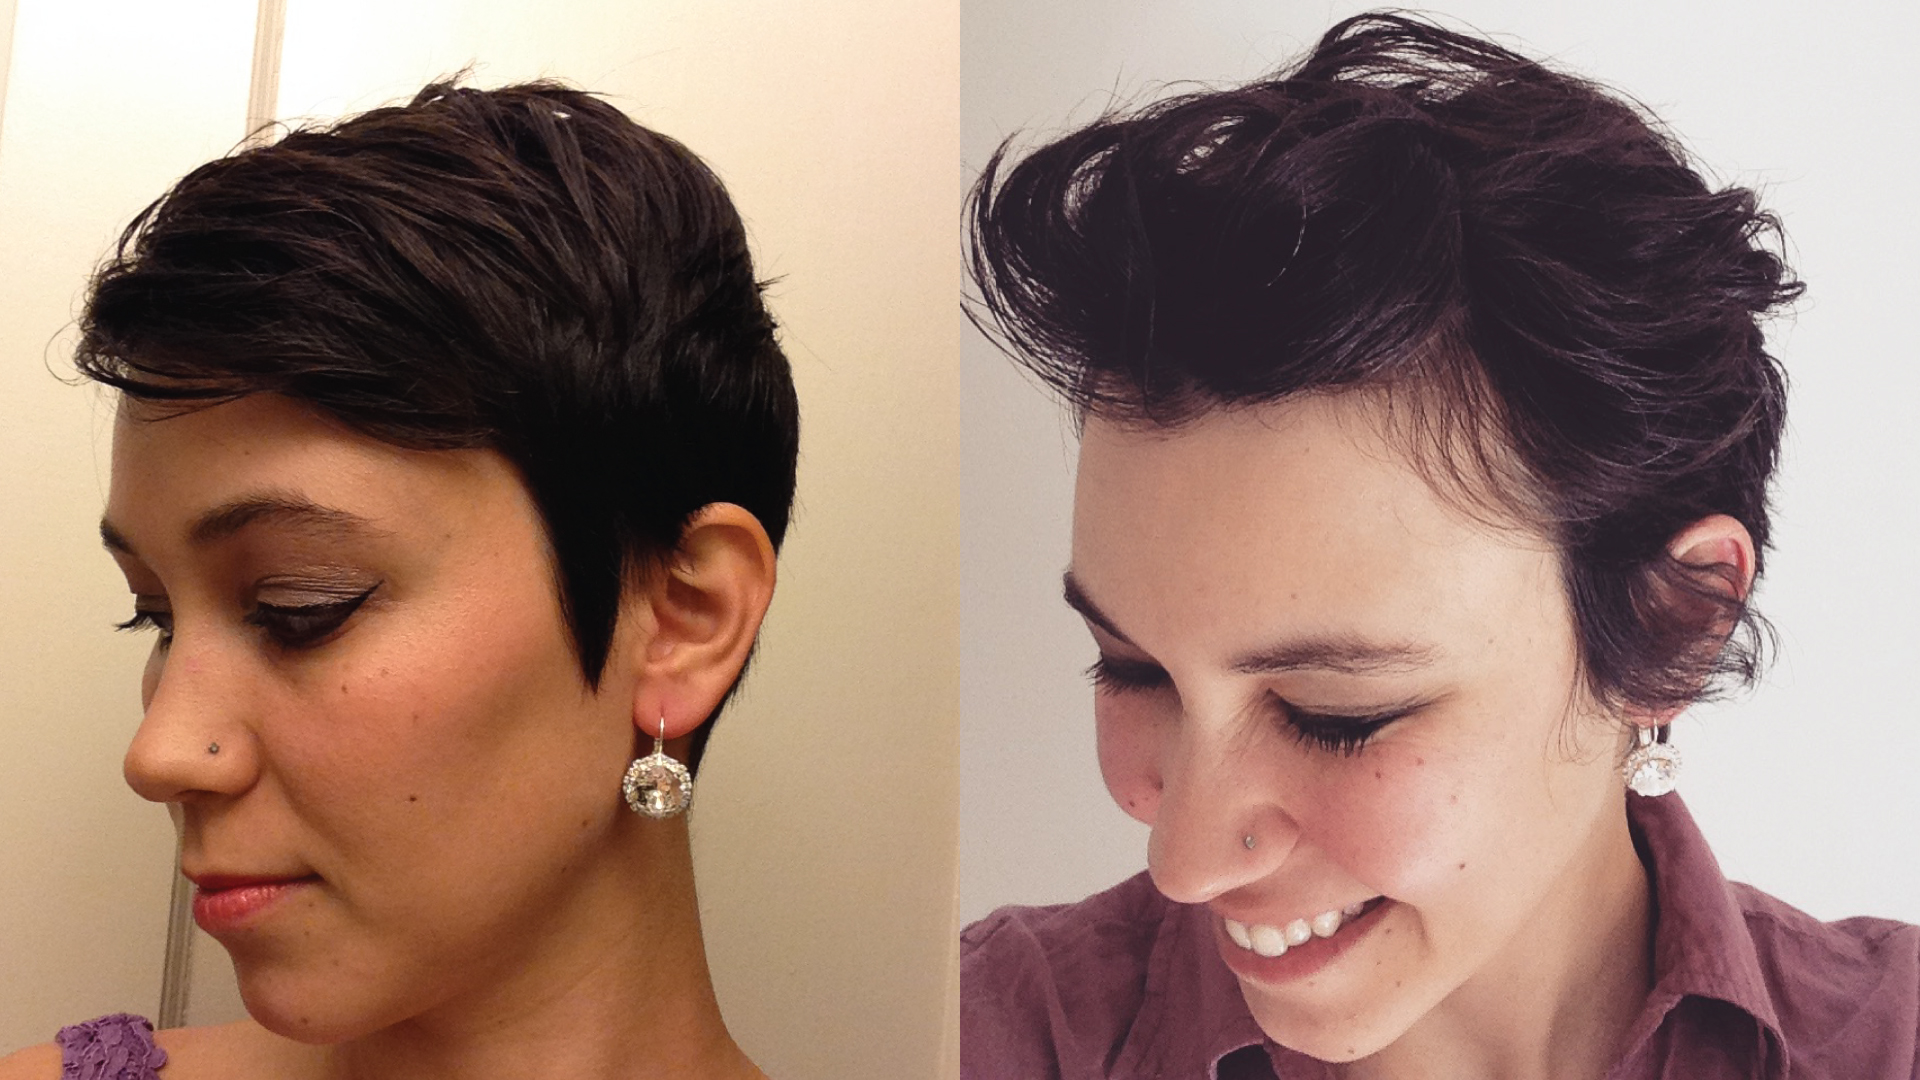 styling a pixie cut